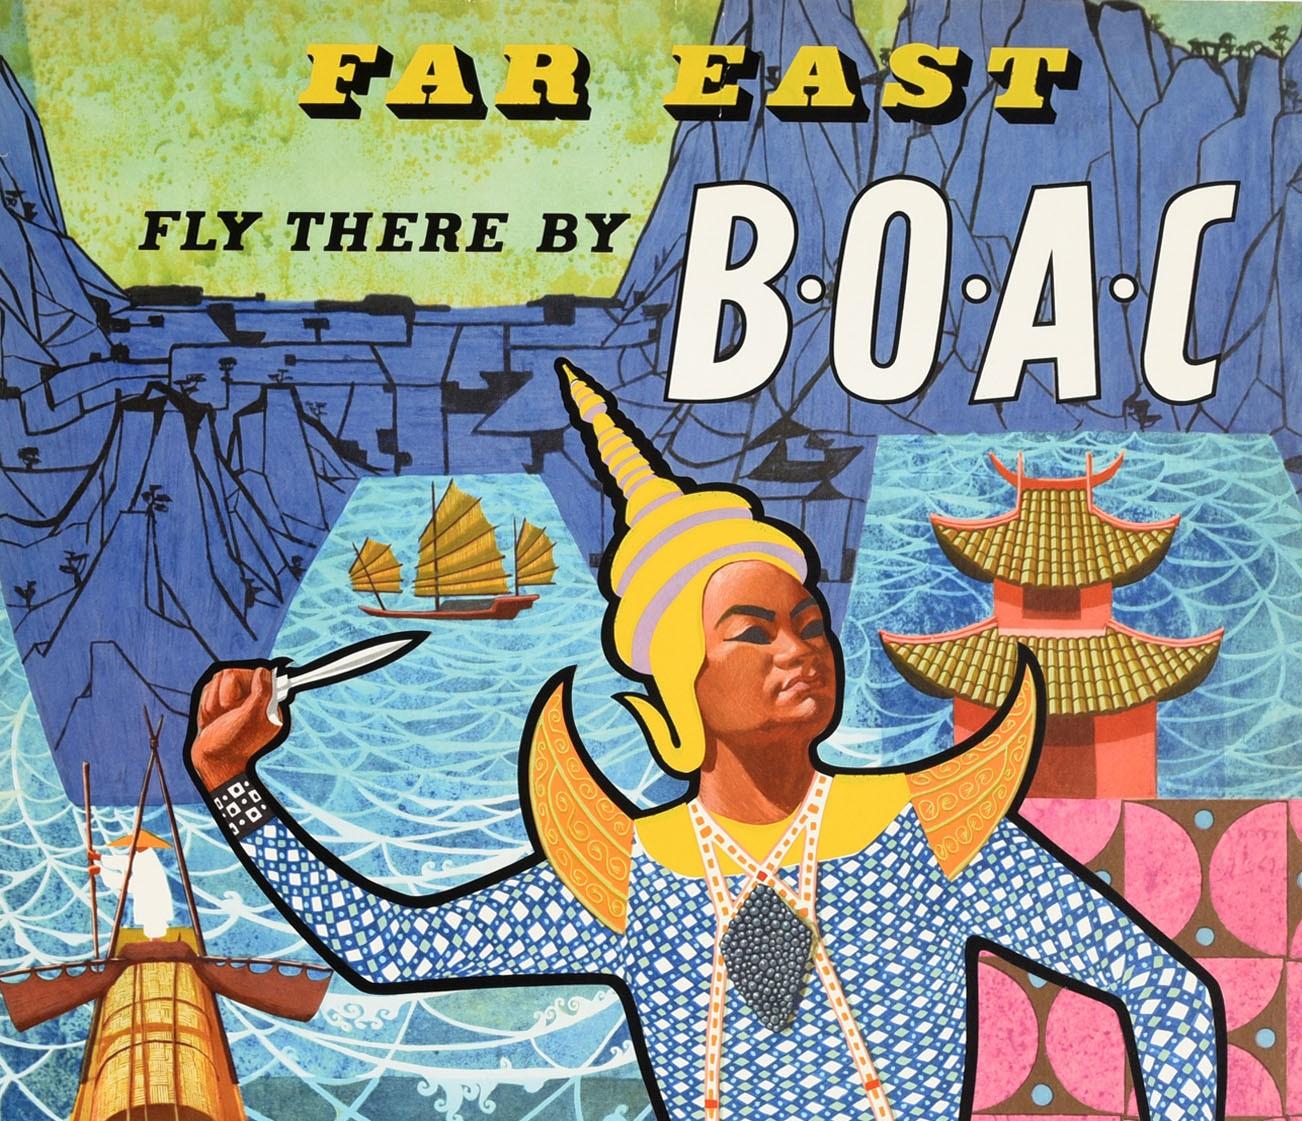 British Original Vintage Air Travel Poster Far East Fly There By BOAC Asia Dance Design